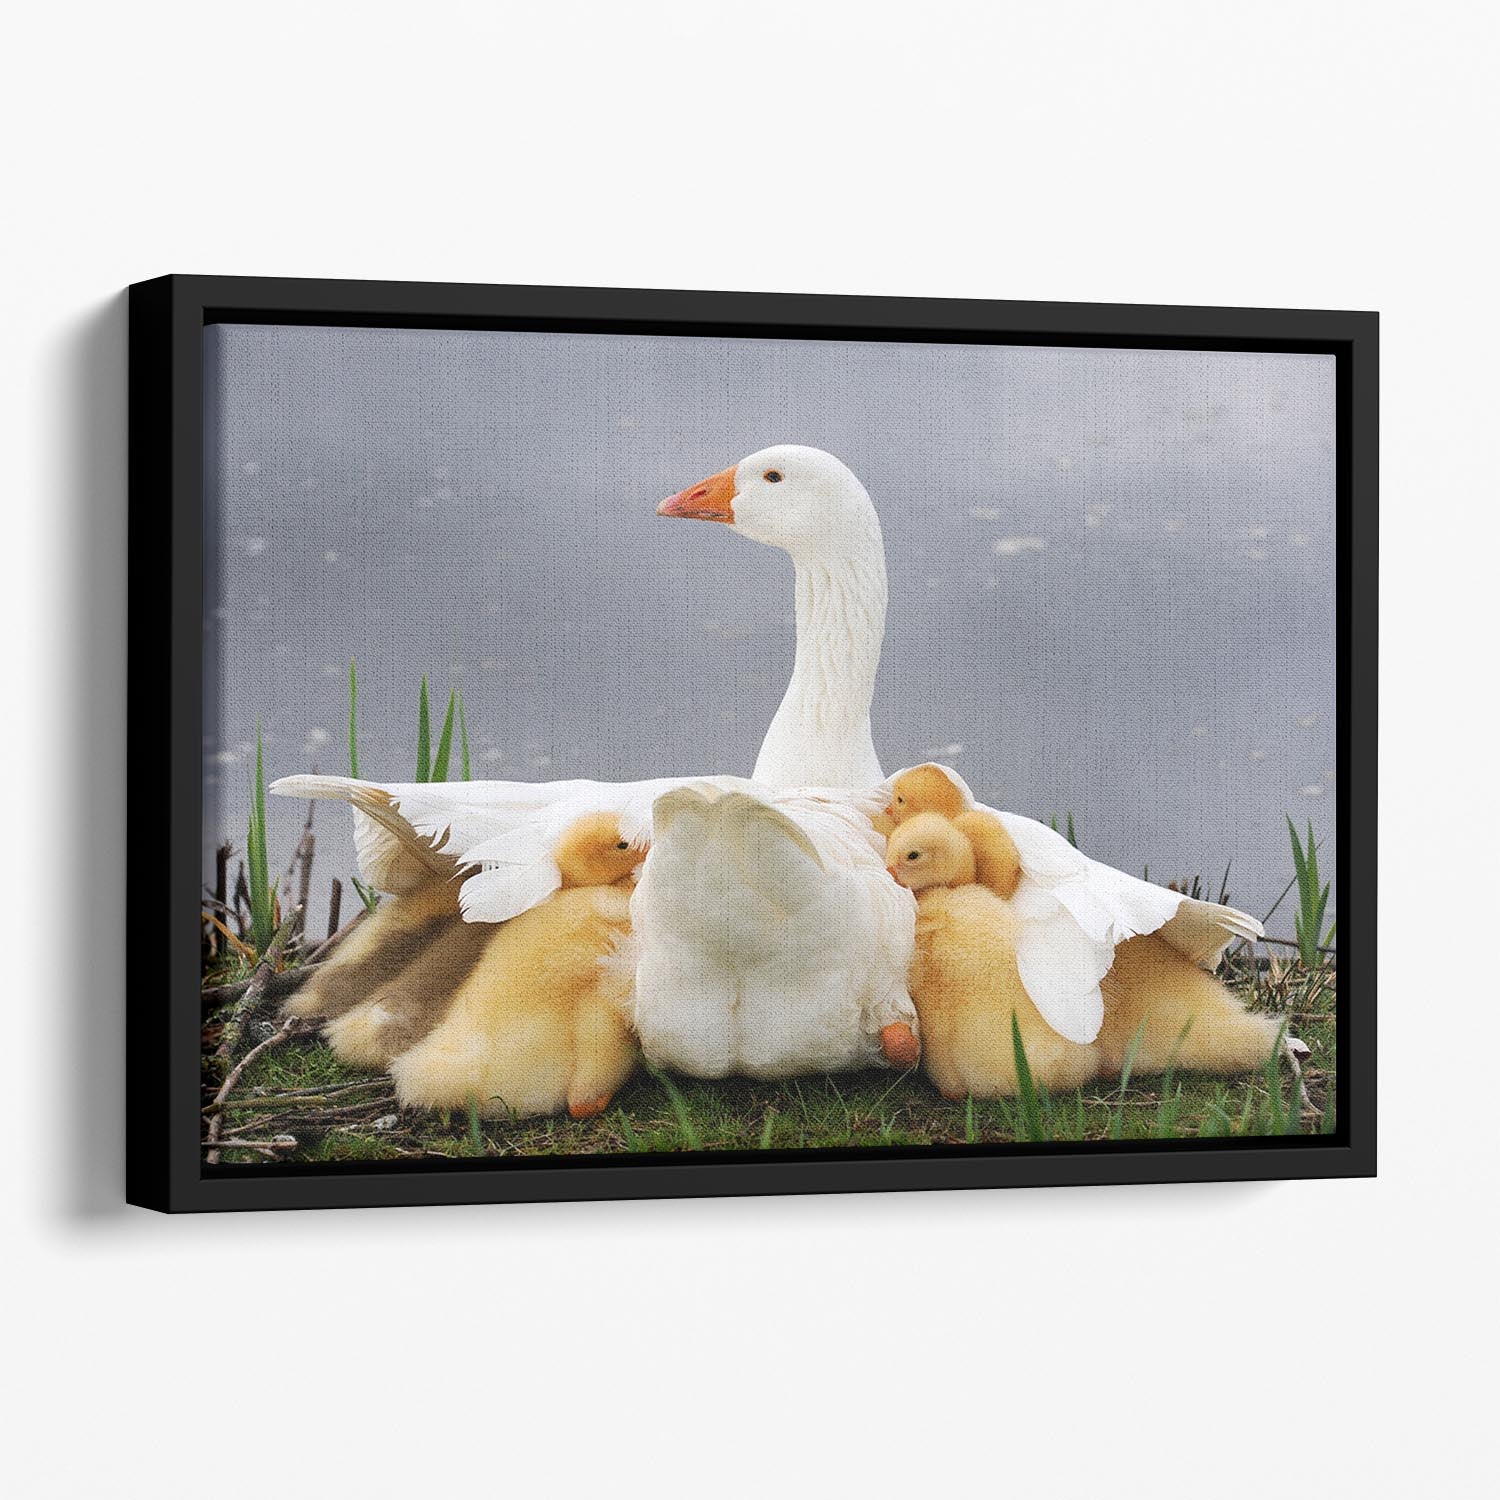 Mums protection Floating Framed Canvas - 1x - 1